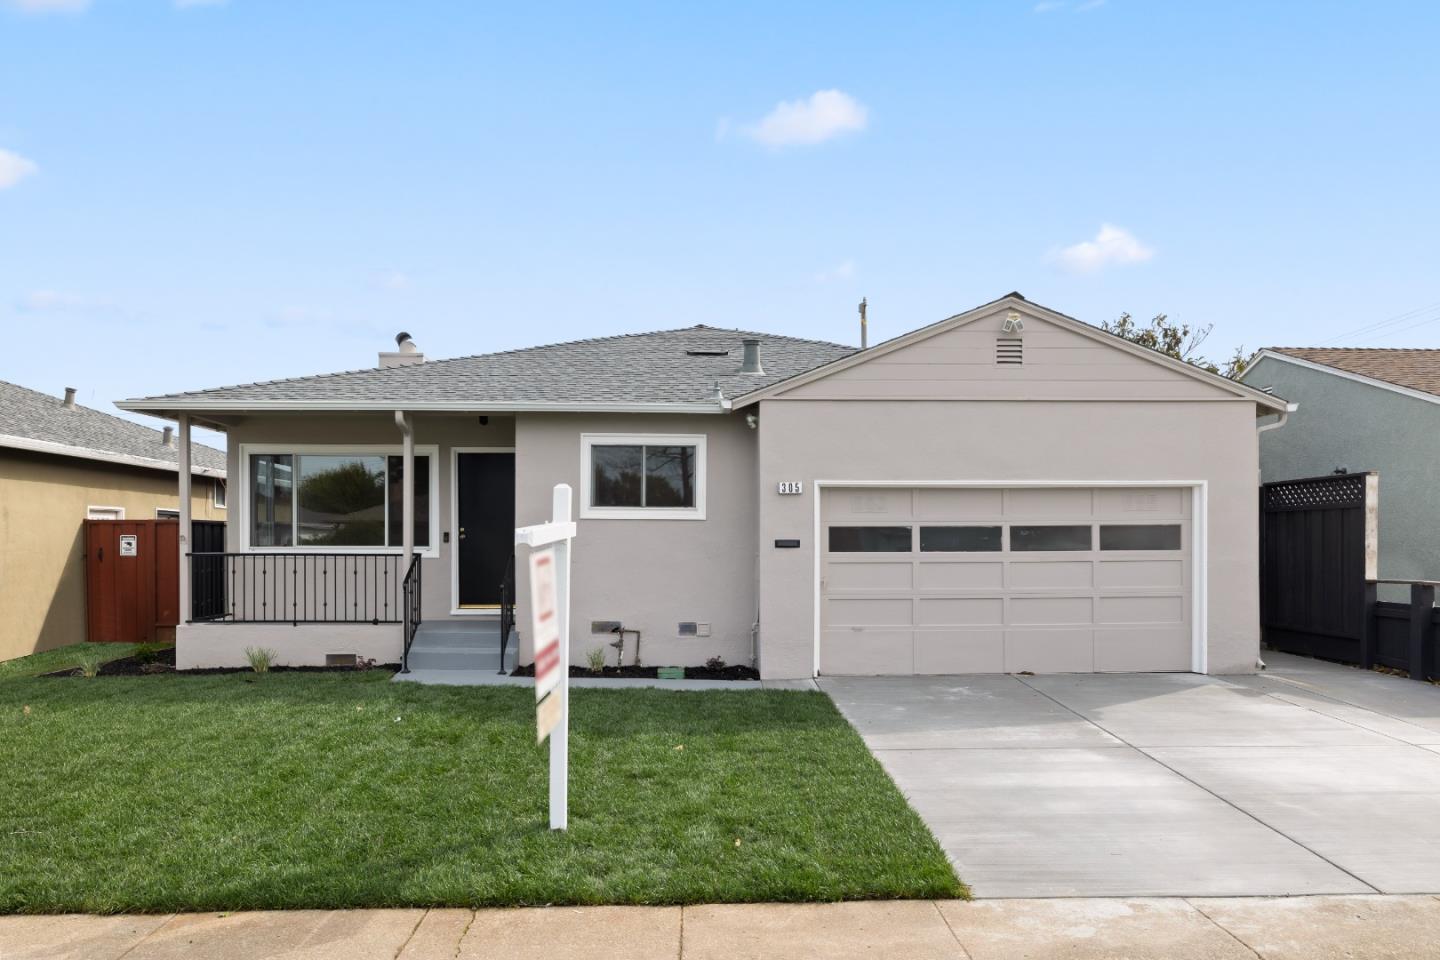 Photo of 305 San Pablo Ave in Millbrae, CA